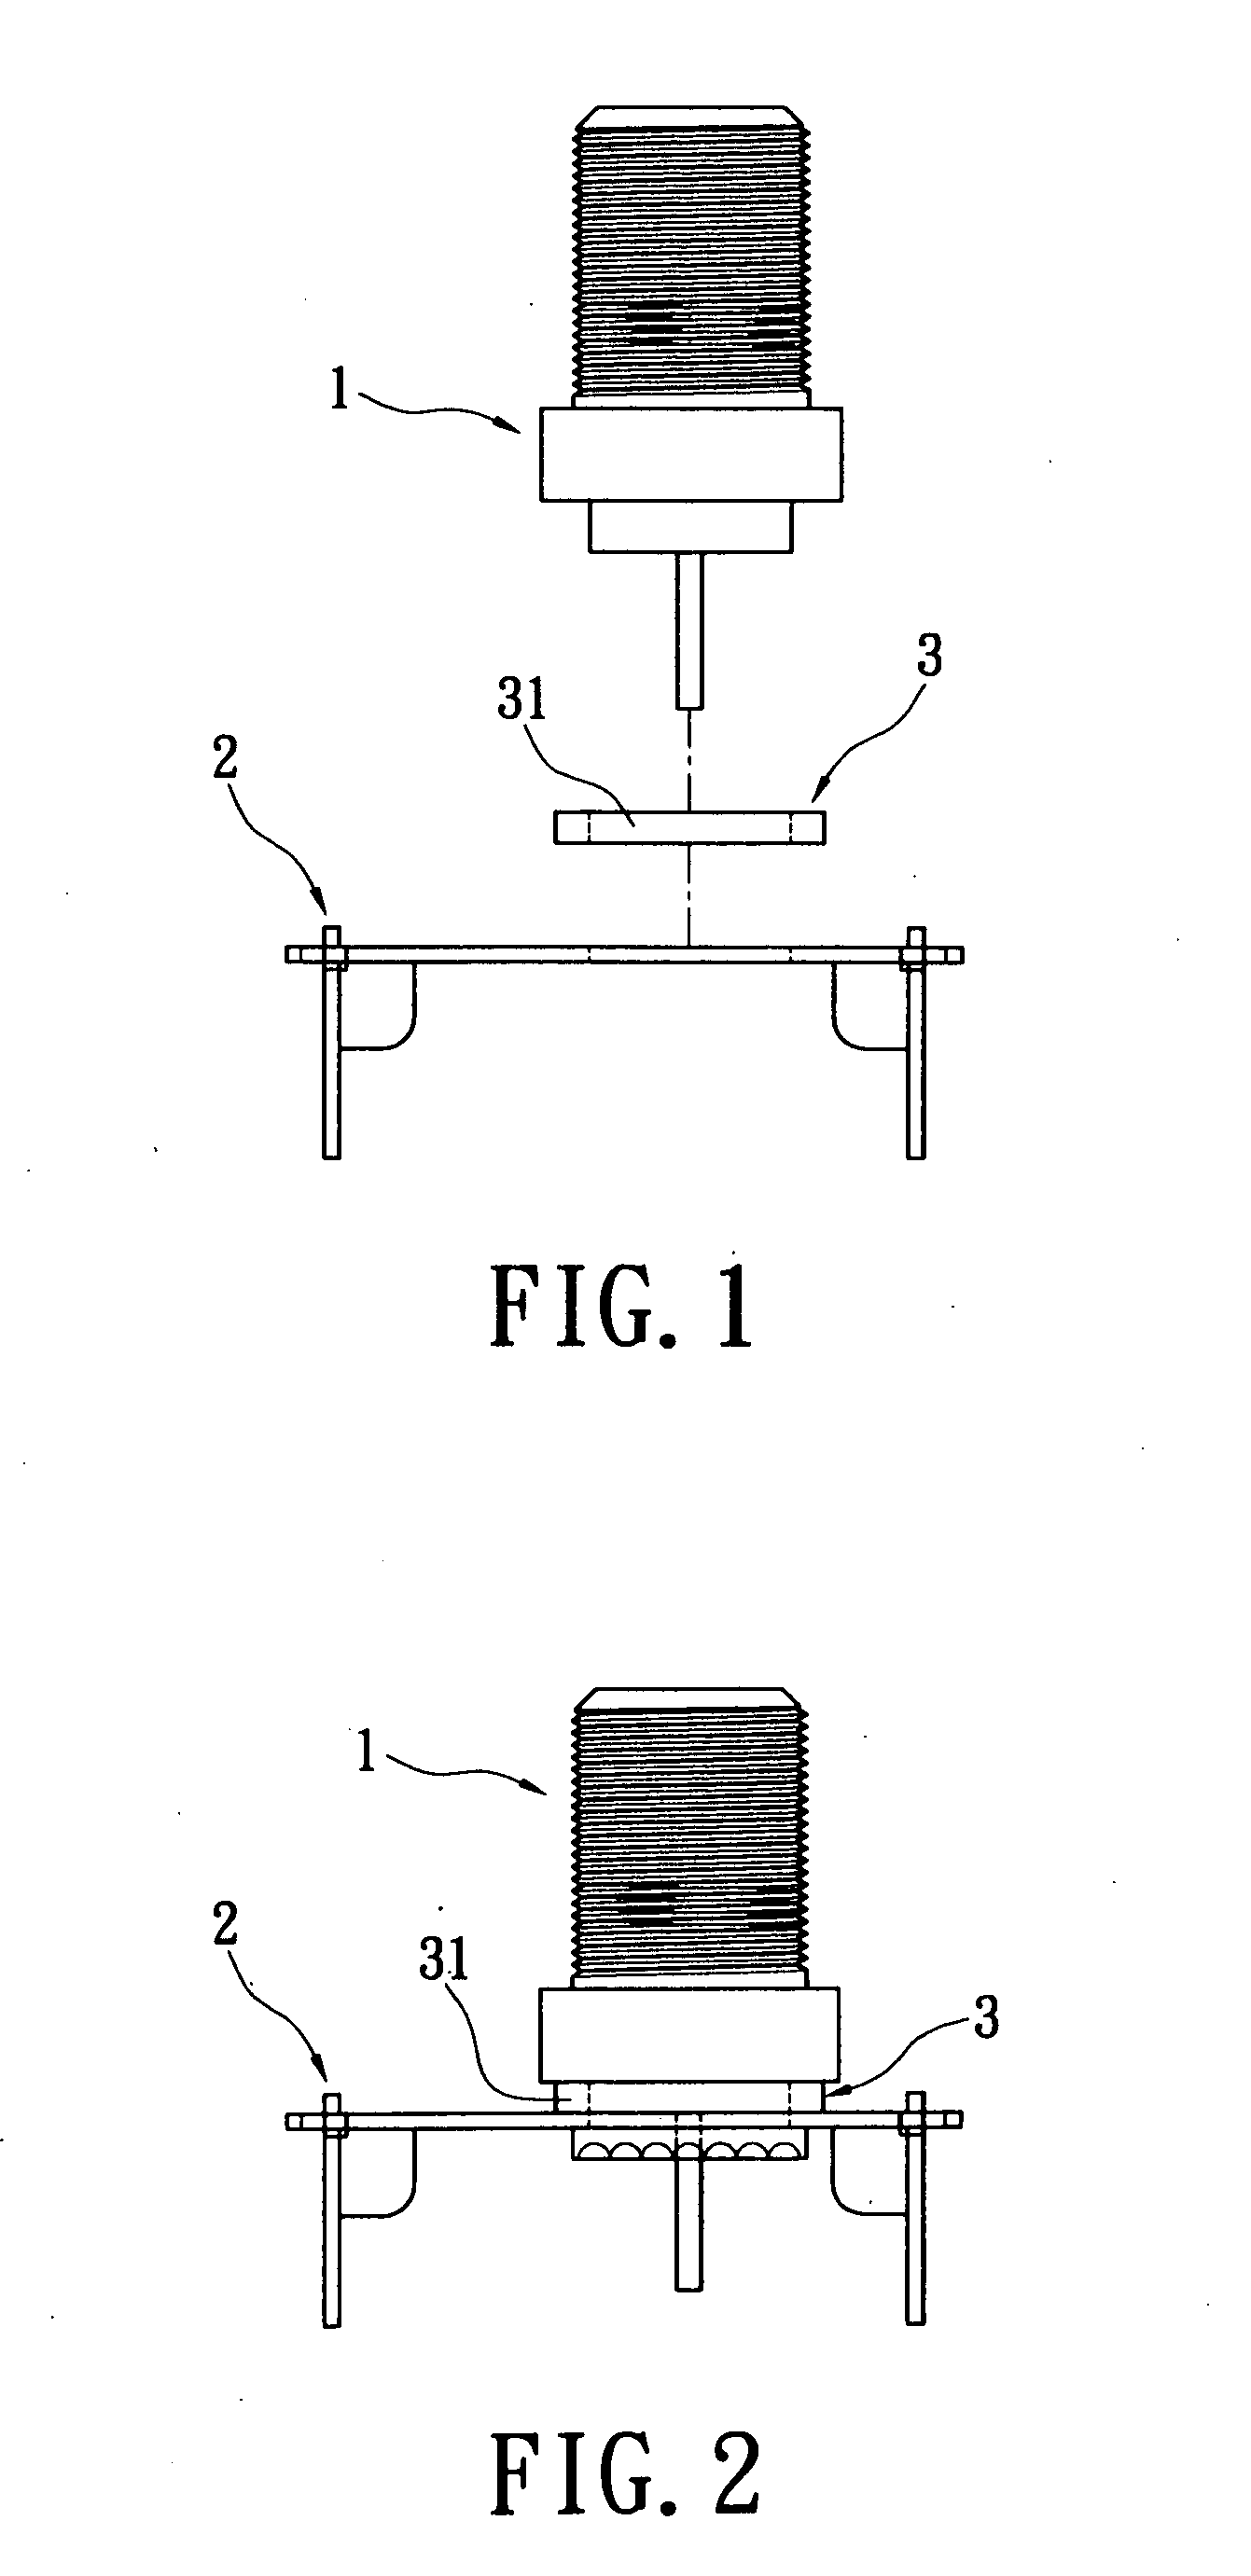 Structure for improving the voltage difference of a connector